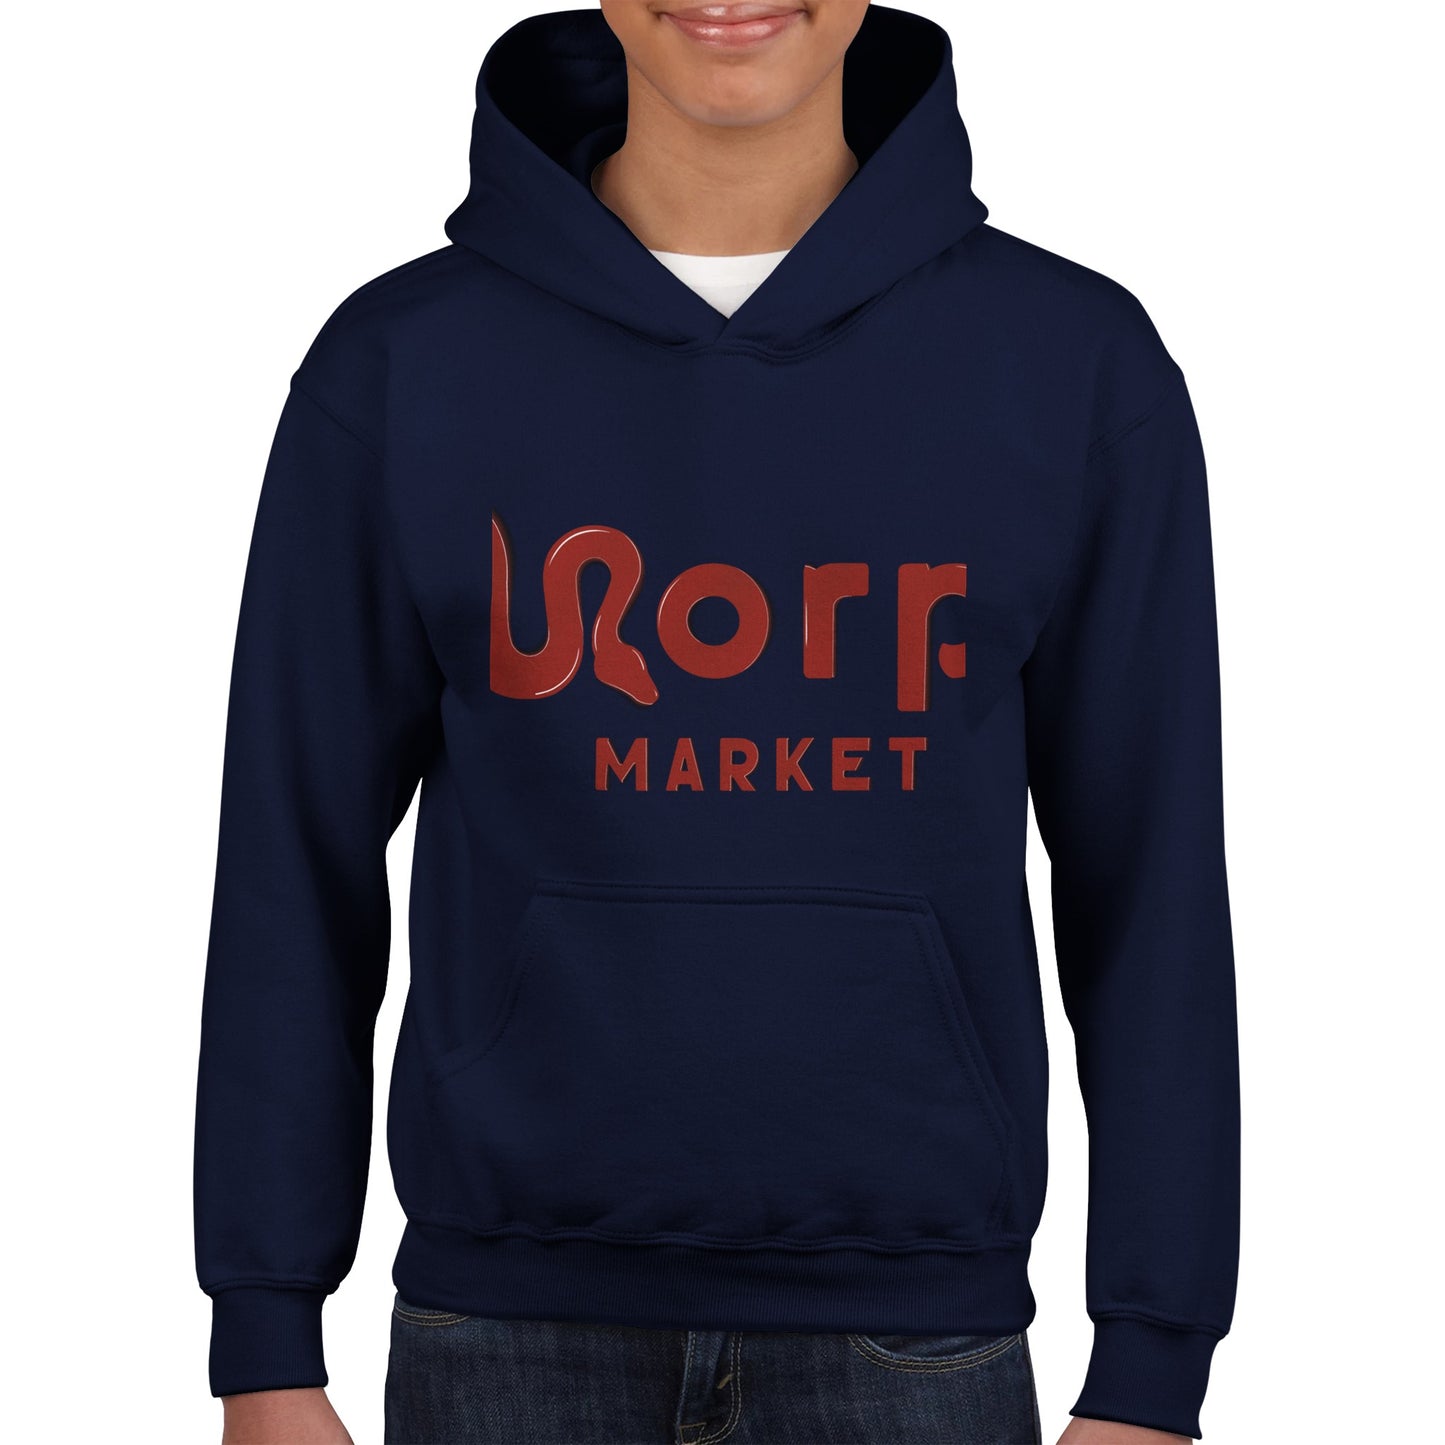 Morph Market (Red) - Classic Kids Pullover Hoodie